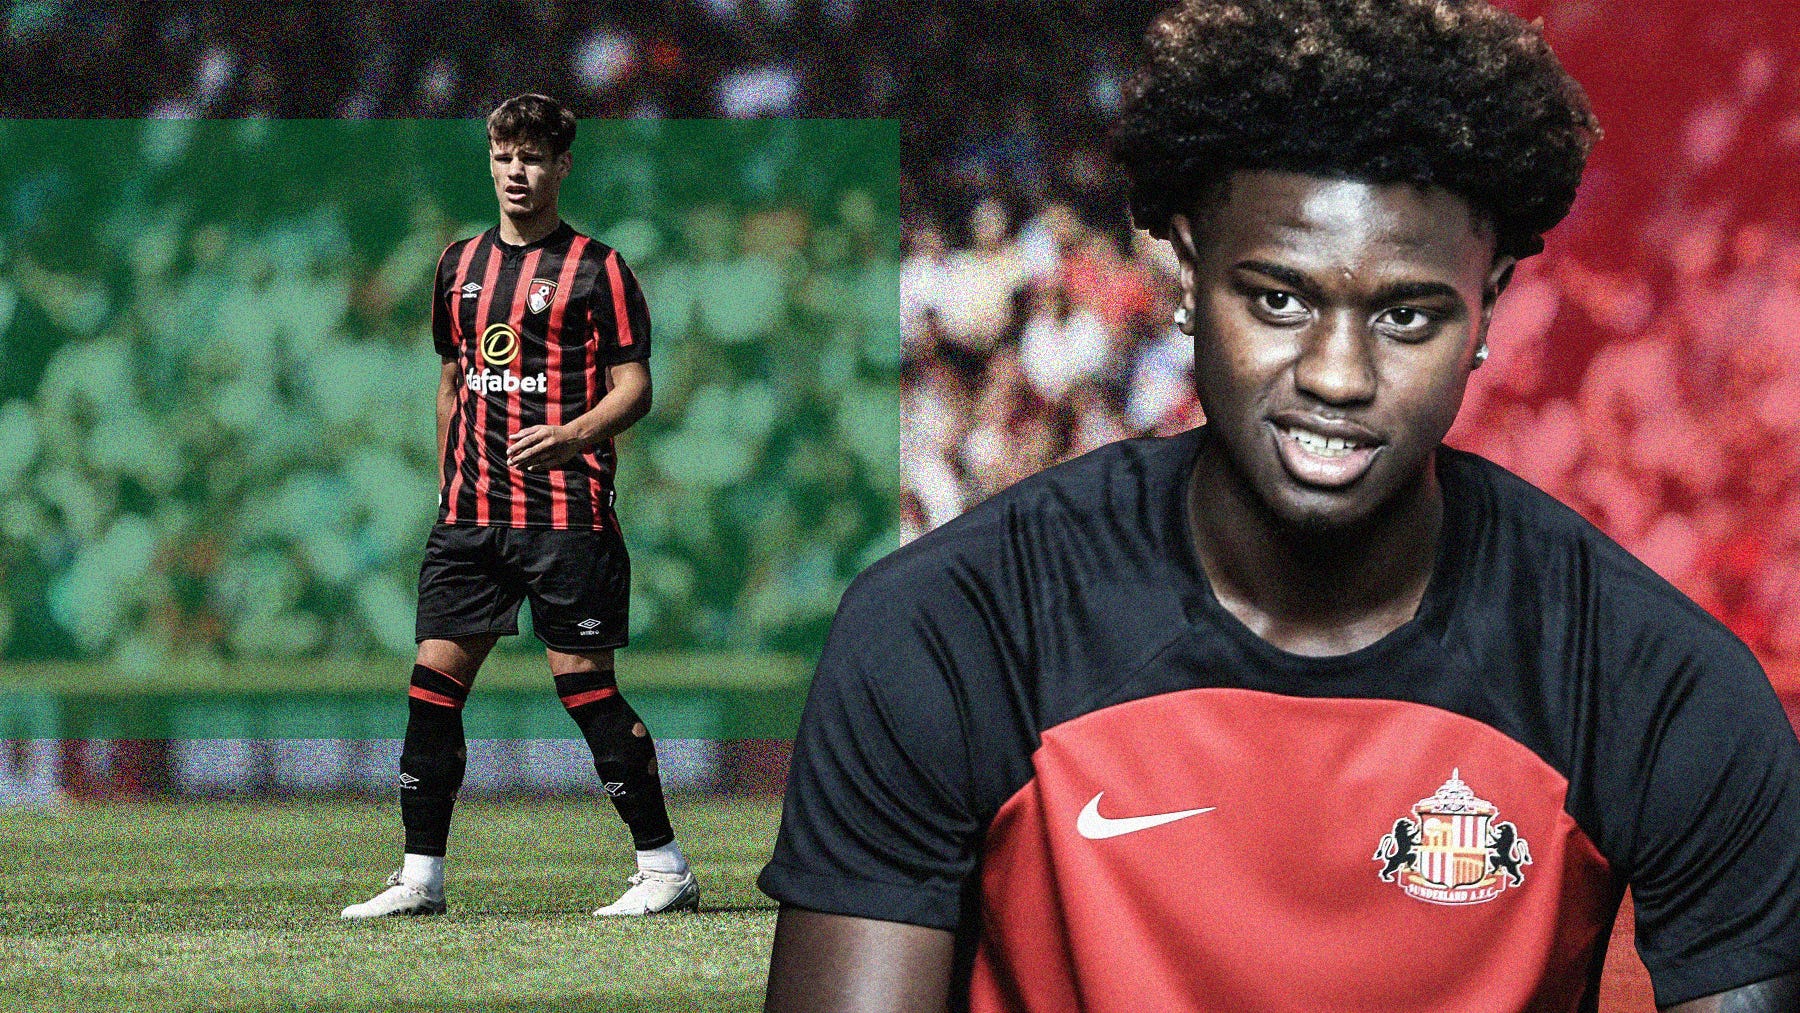 A composite image featuring two photos: one the left is Milos Kerkez playing for Bournemouth, on the right is a close-up of Sunderland's Luís Semedo